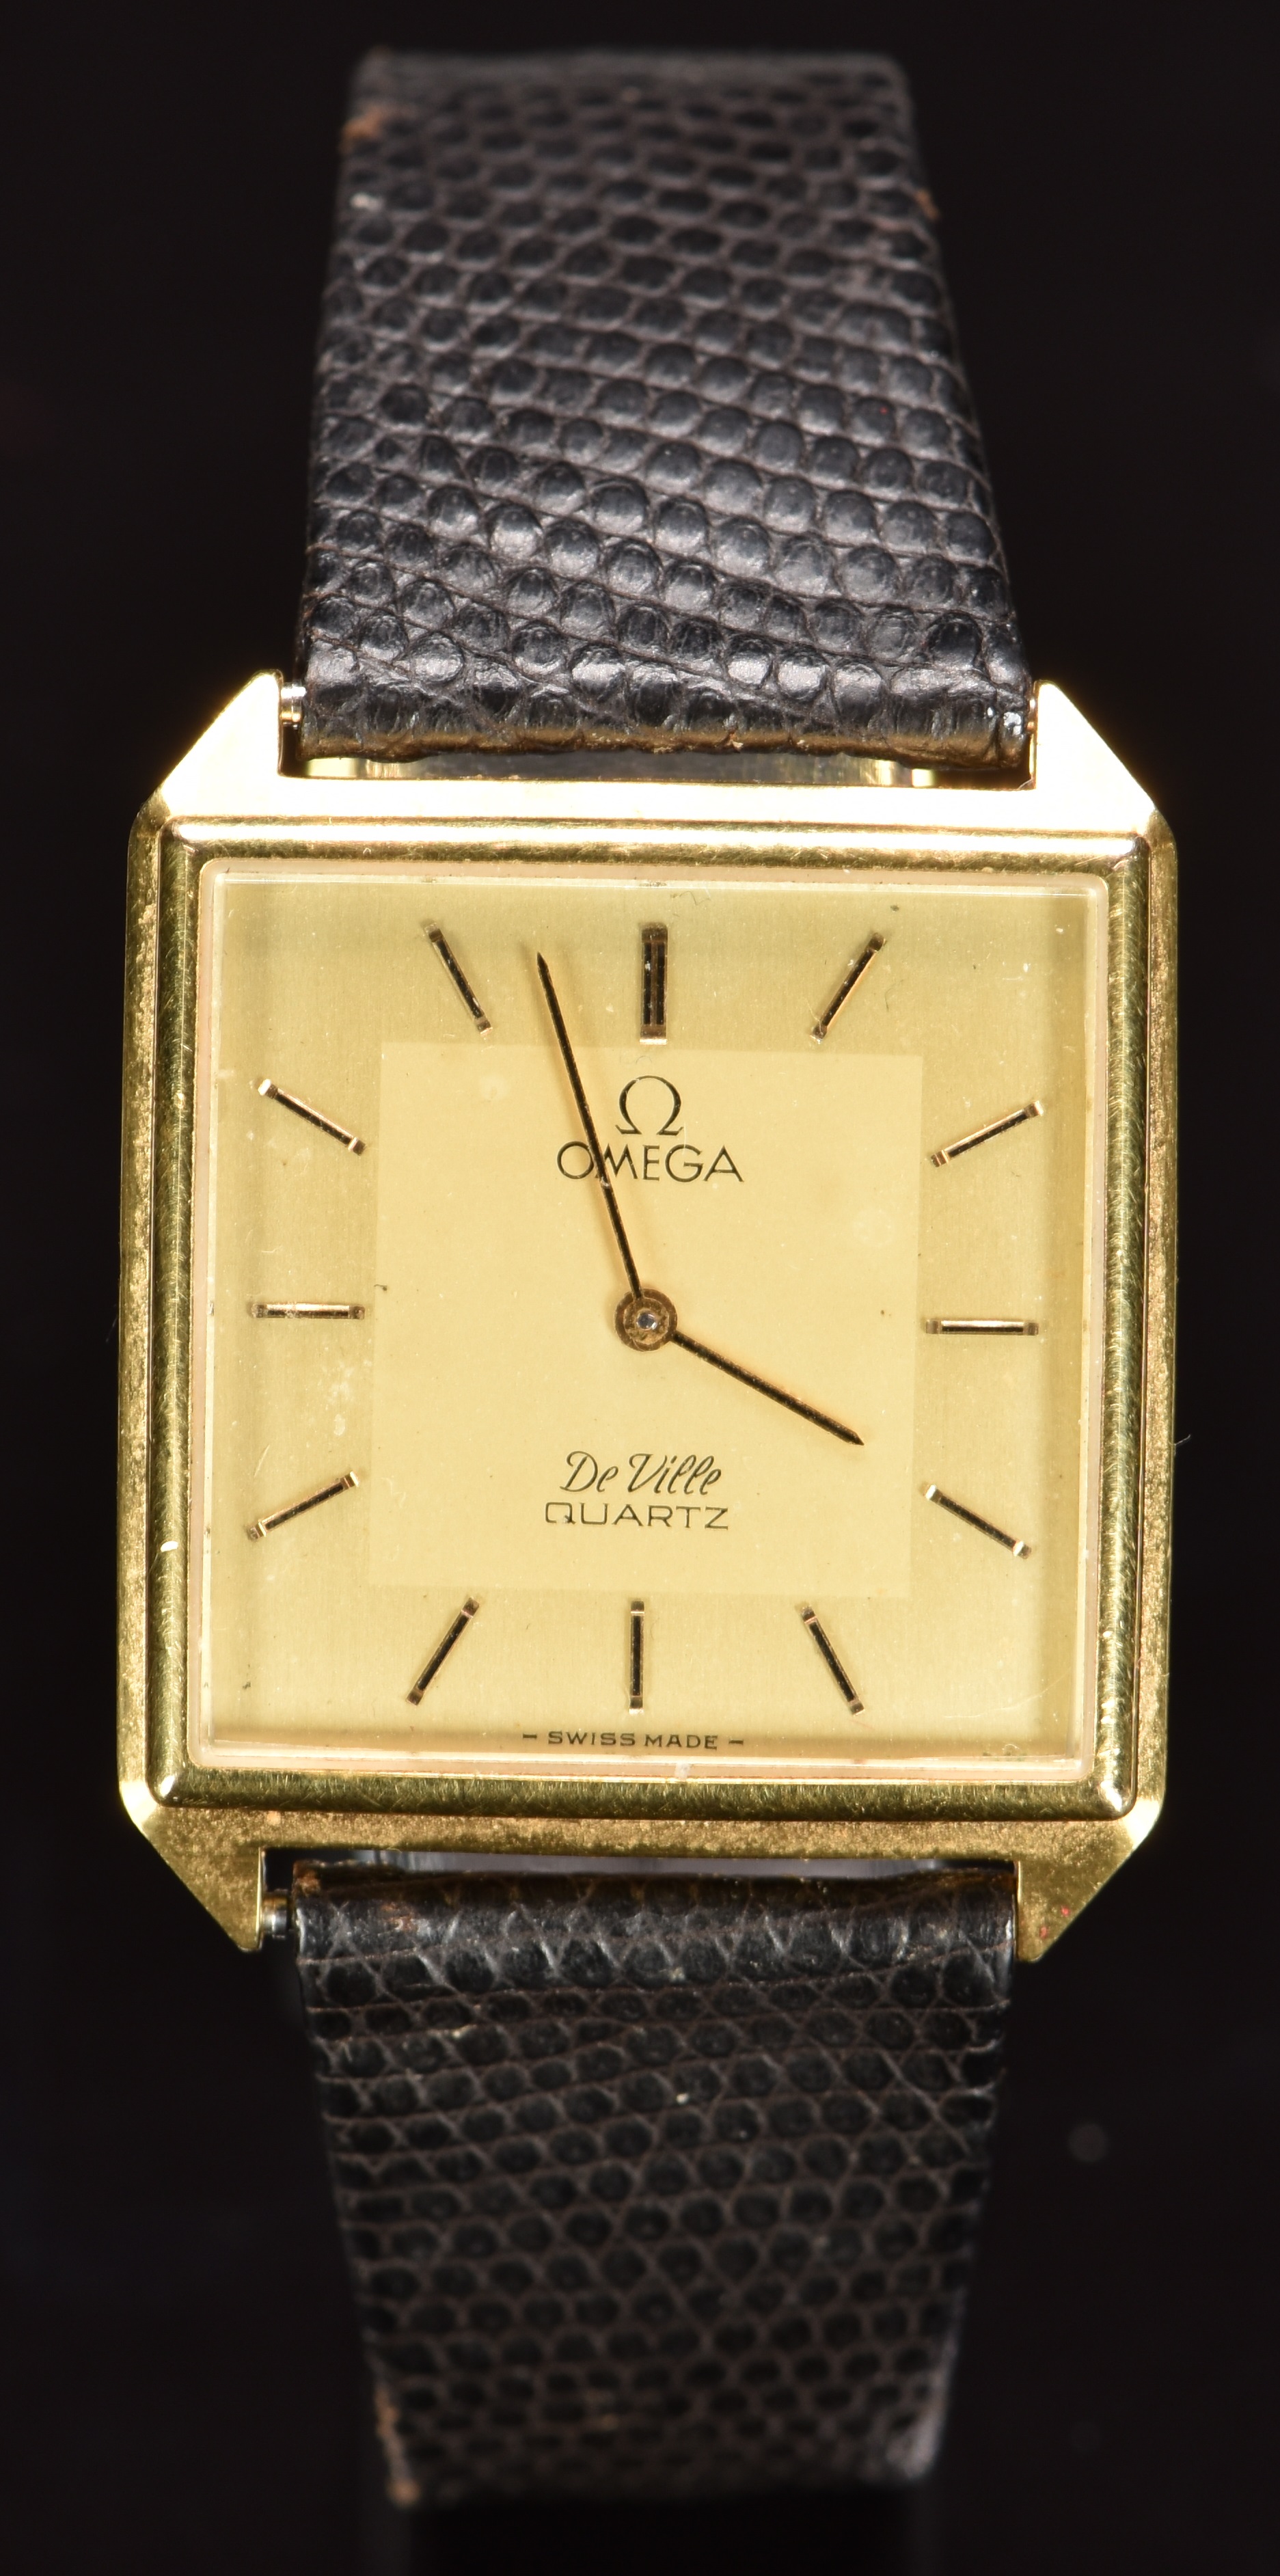 Omega De Ville gentleman's wristwatch ref. 191.0075 with black hands and baton hour markers, two-